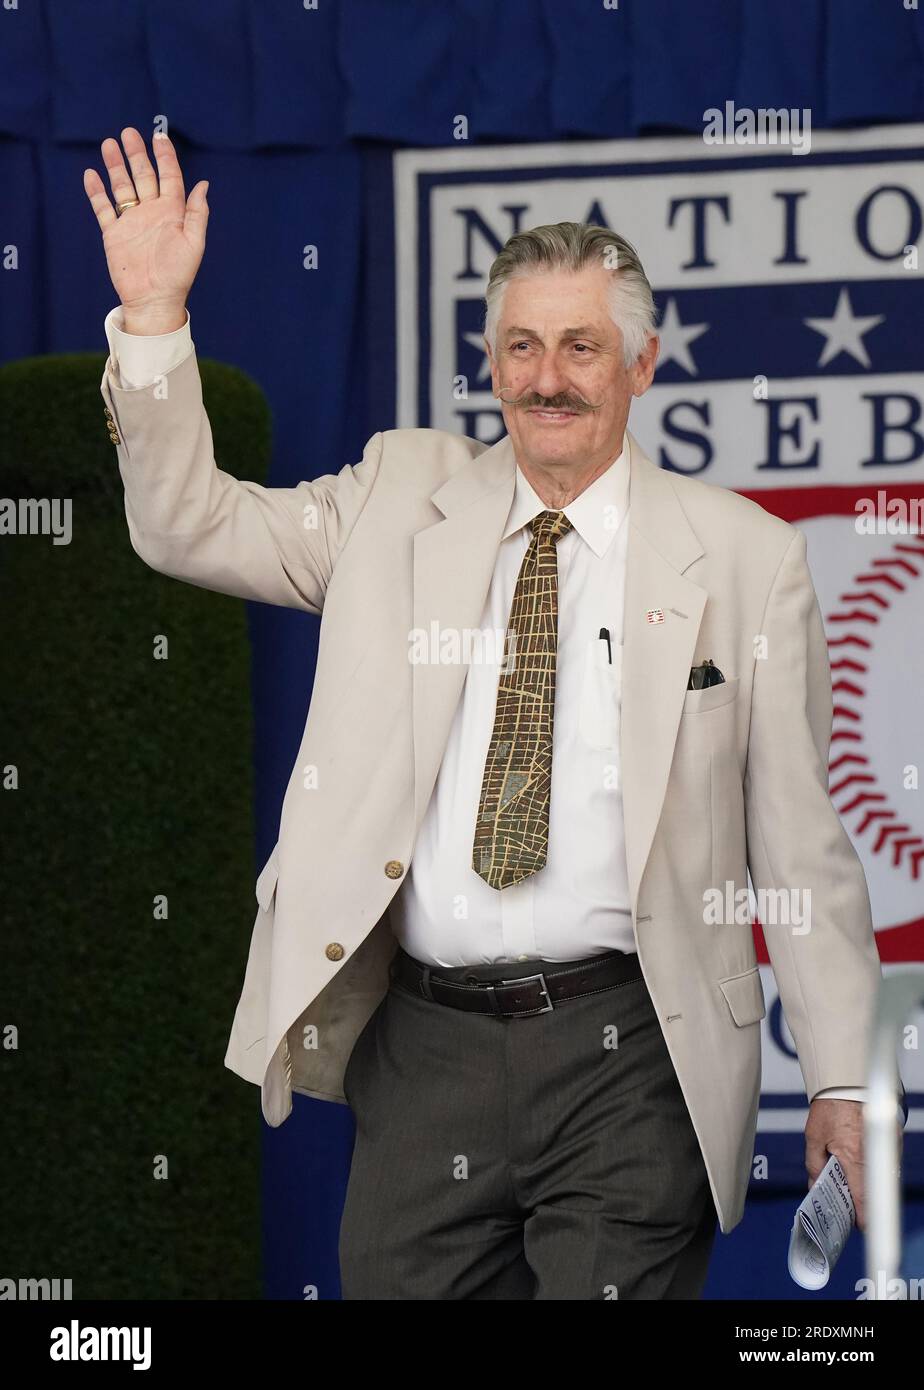 Rollie Fingers, other MLB legends to appear at charity golf event, Golf